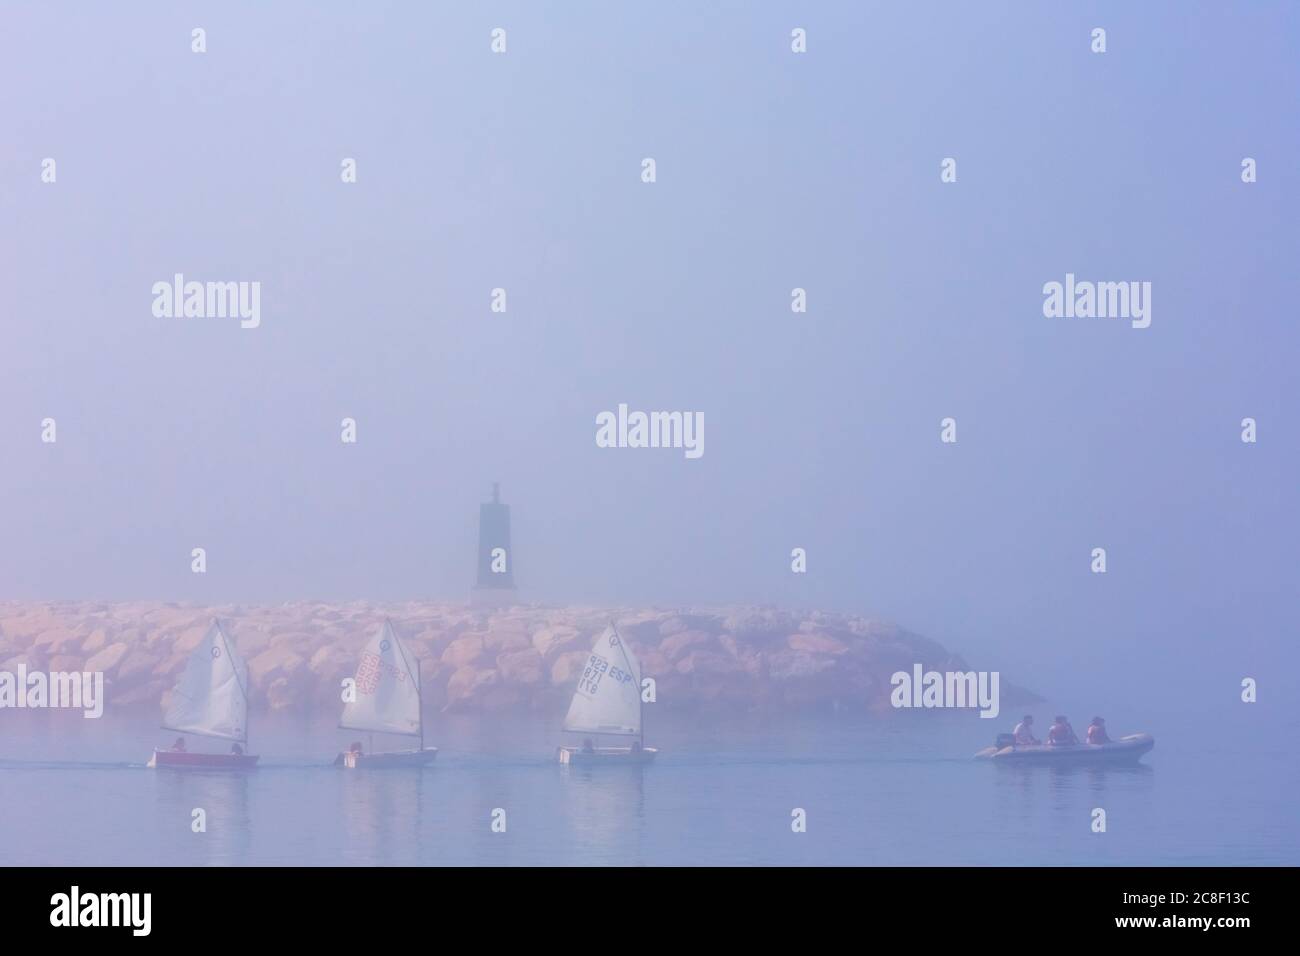 Three Optimist dinghies being towed from port in early morning sea mist, Marbella, Costa del Sol, Malaga Province, Spain. Stock Photo